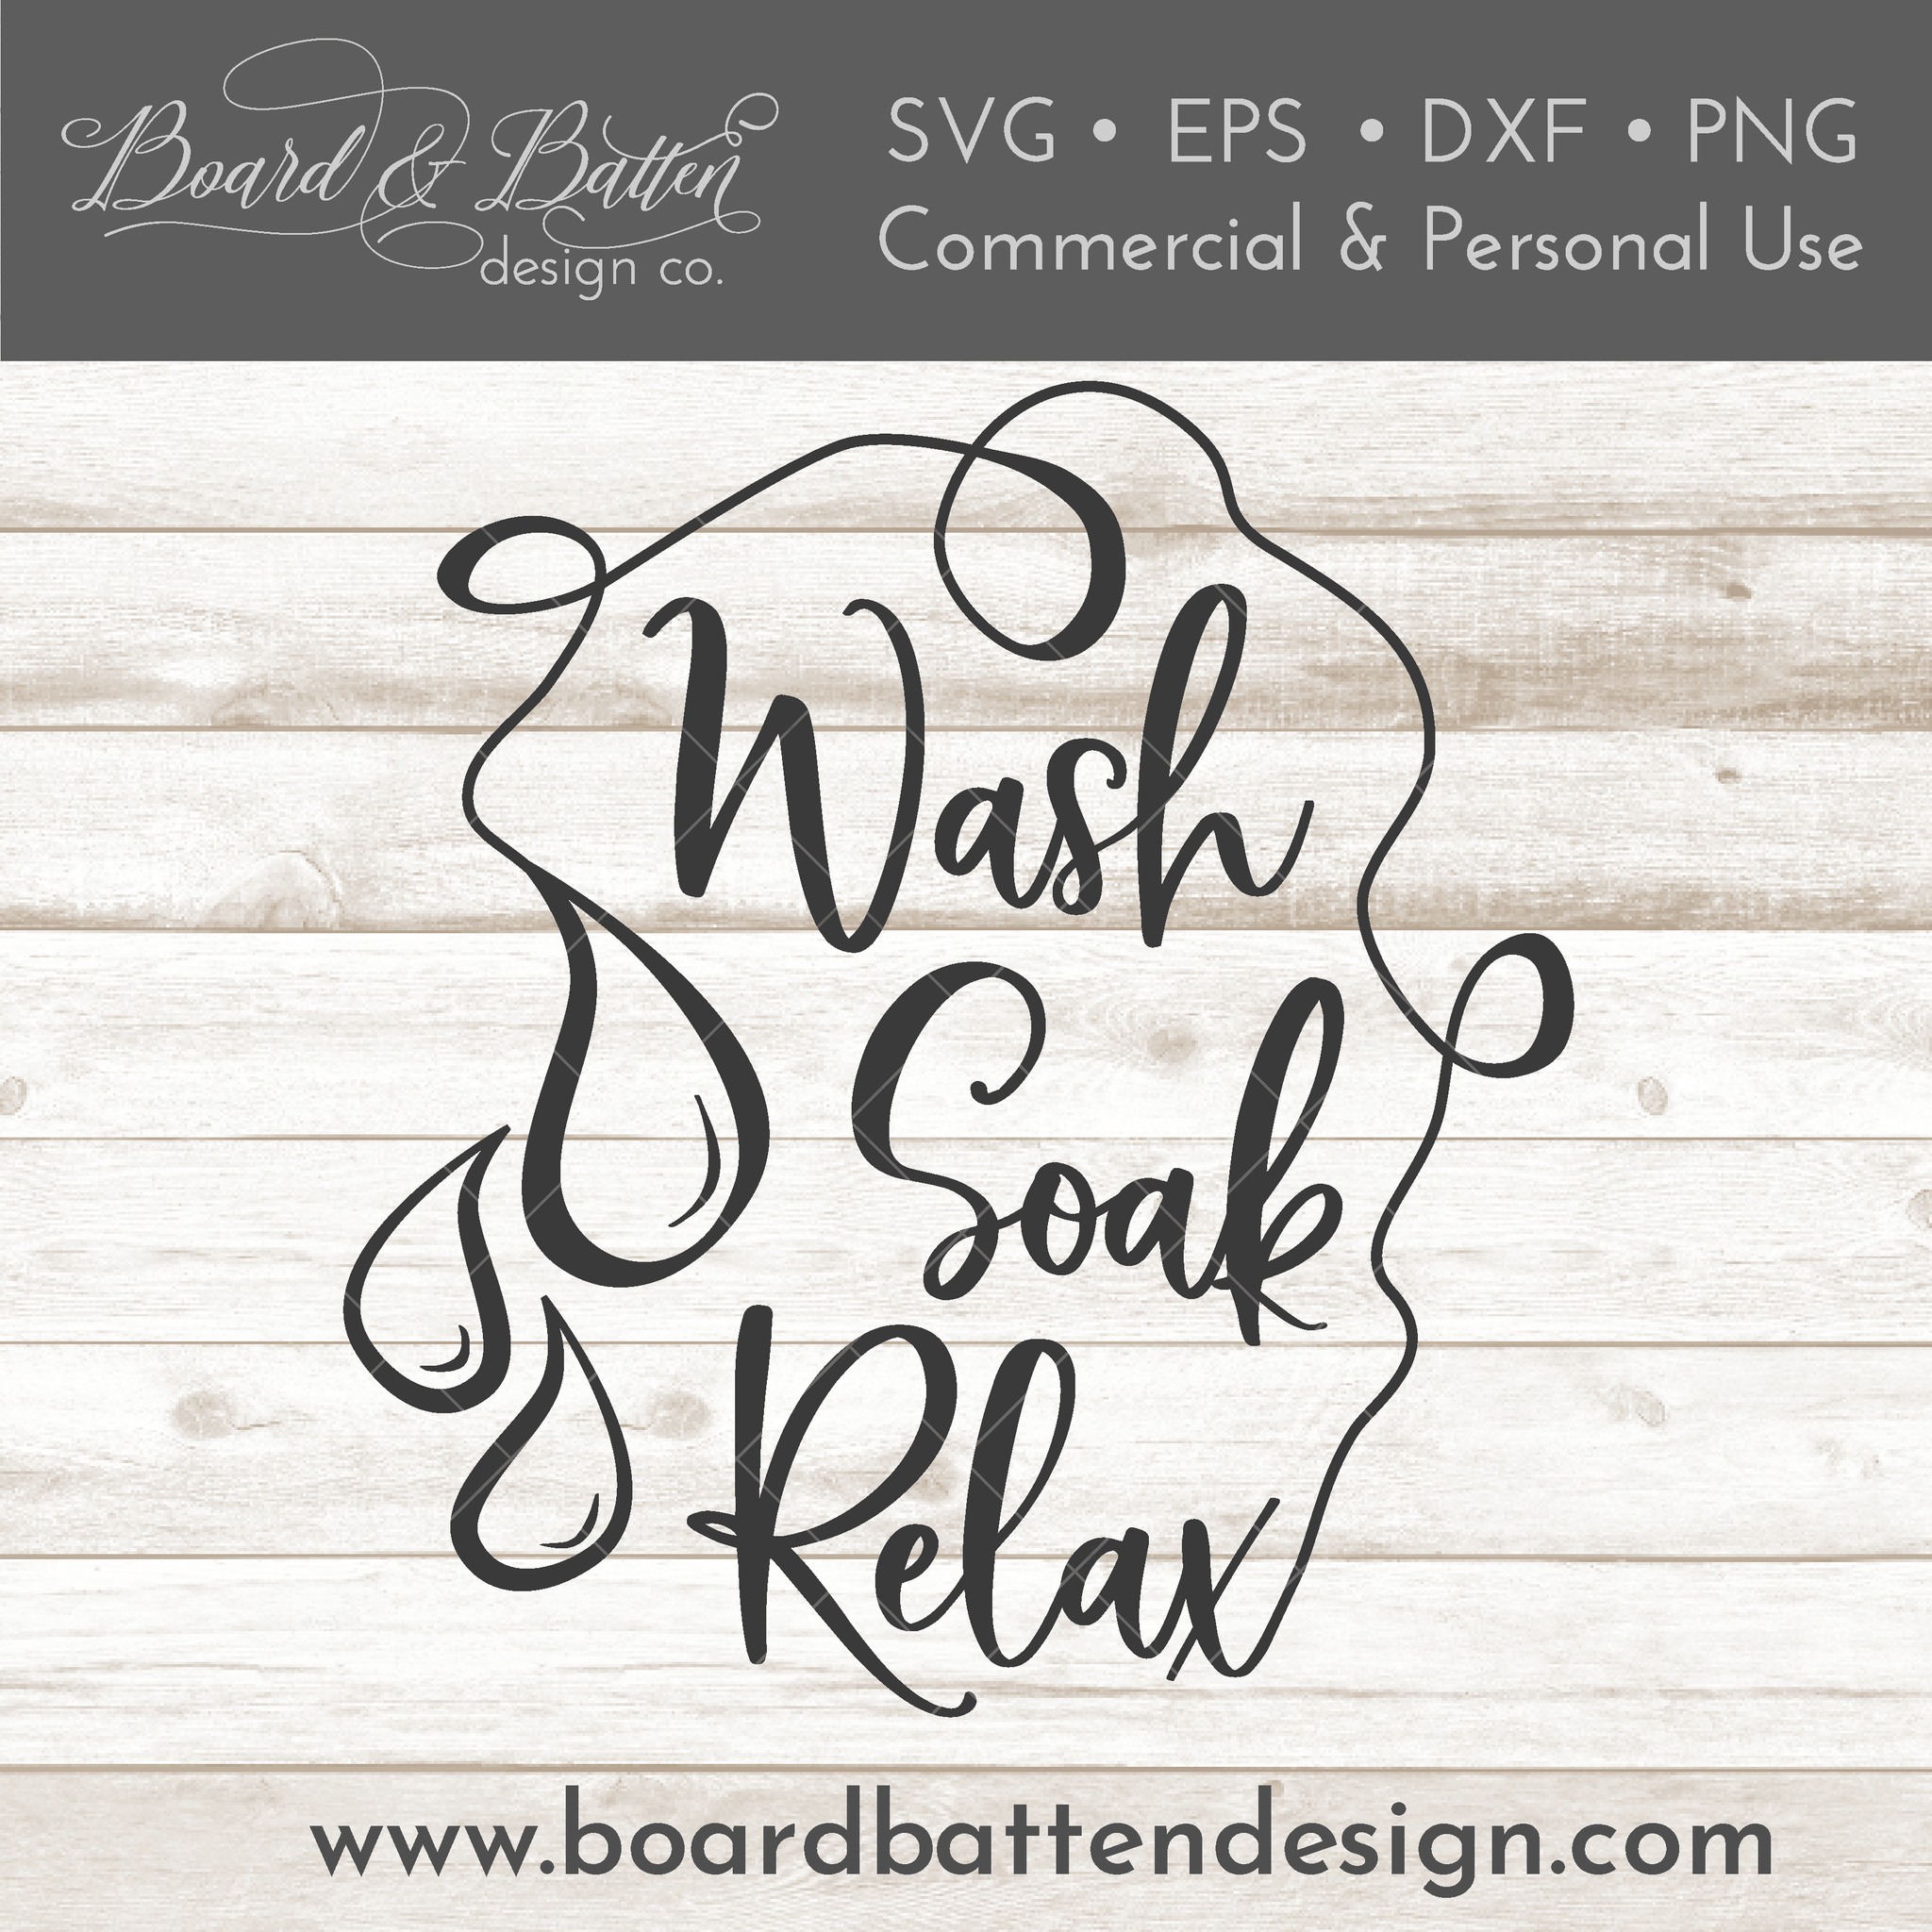 Wash Soak Relax SVG File - Commercial Use SVG Files for Cricut & Silhouette